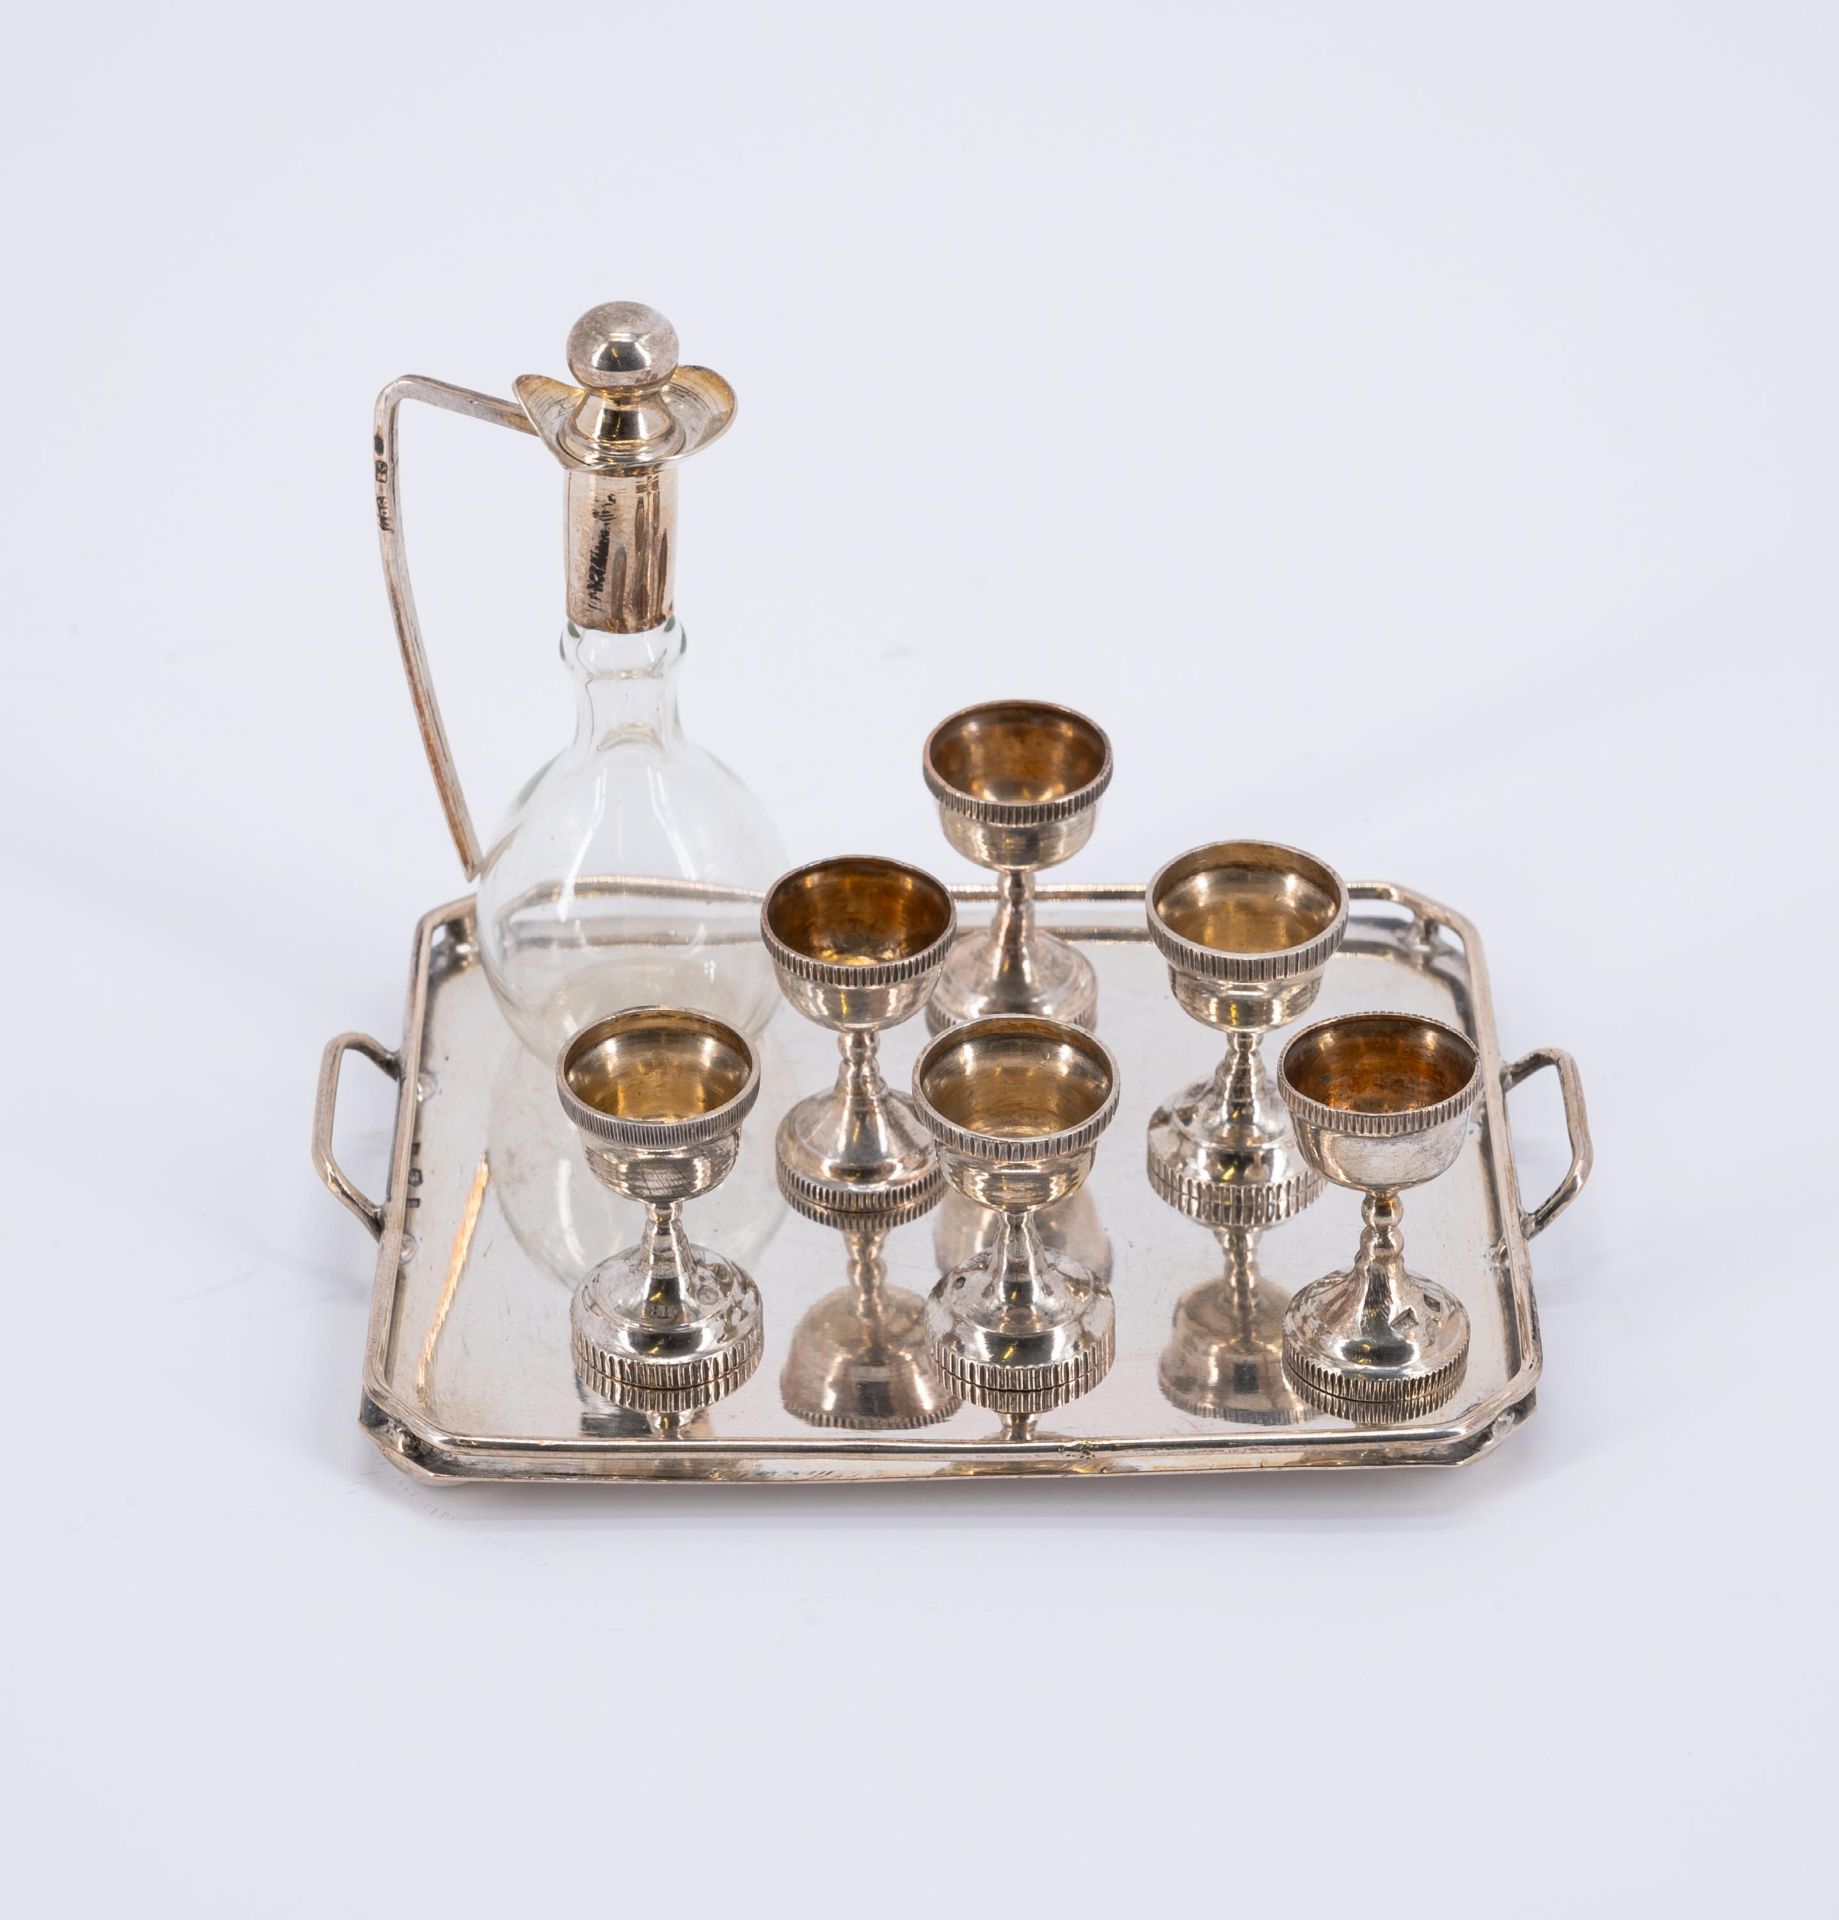 SILVER MINIATURE SERVICE, SIX MINIATURE PLATES AND TWICE SIX GOBLETS ON TRAY - Image 4 of 9